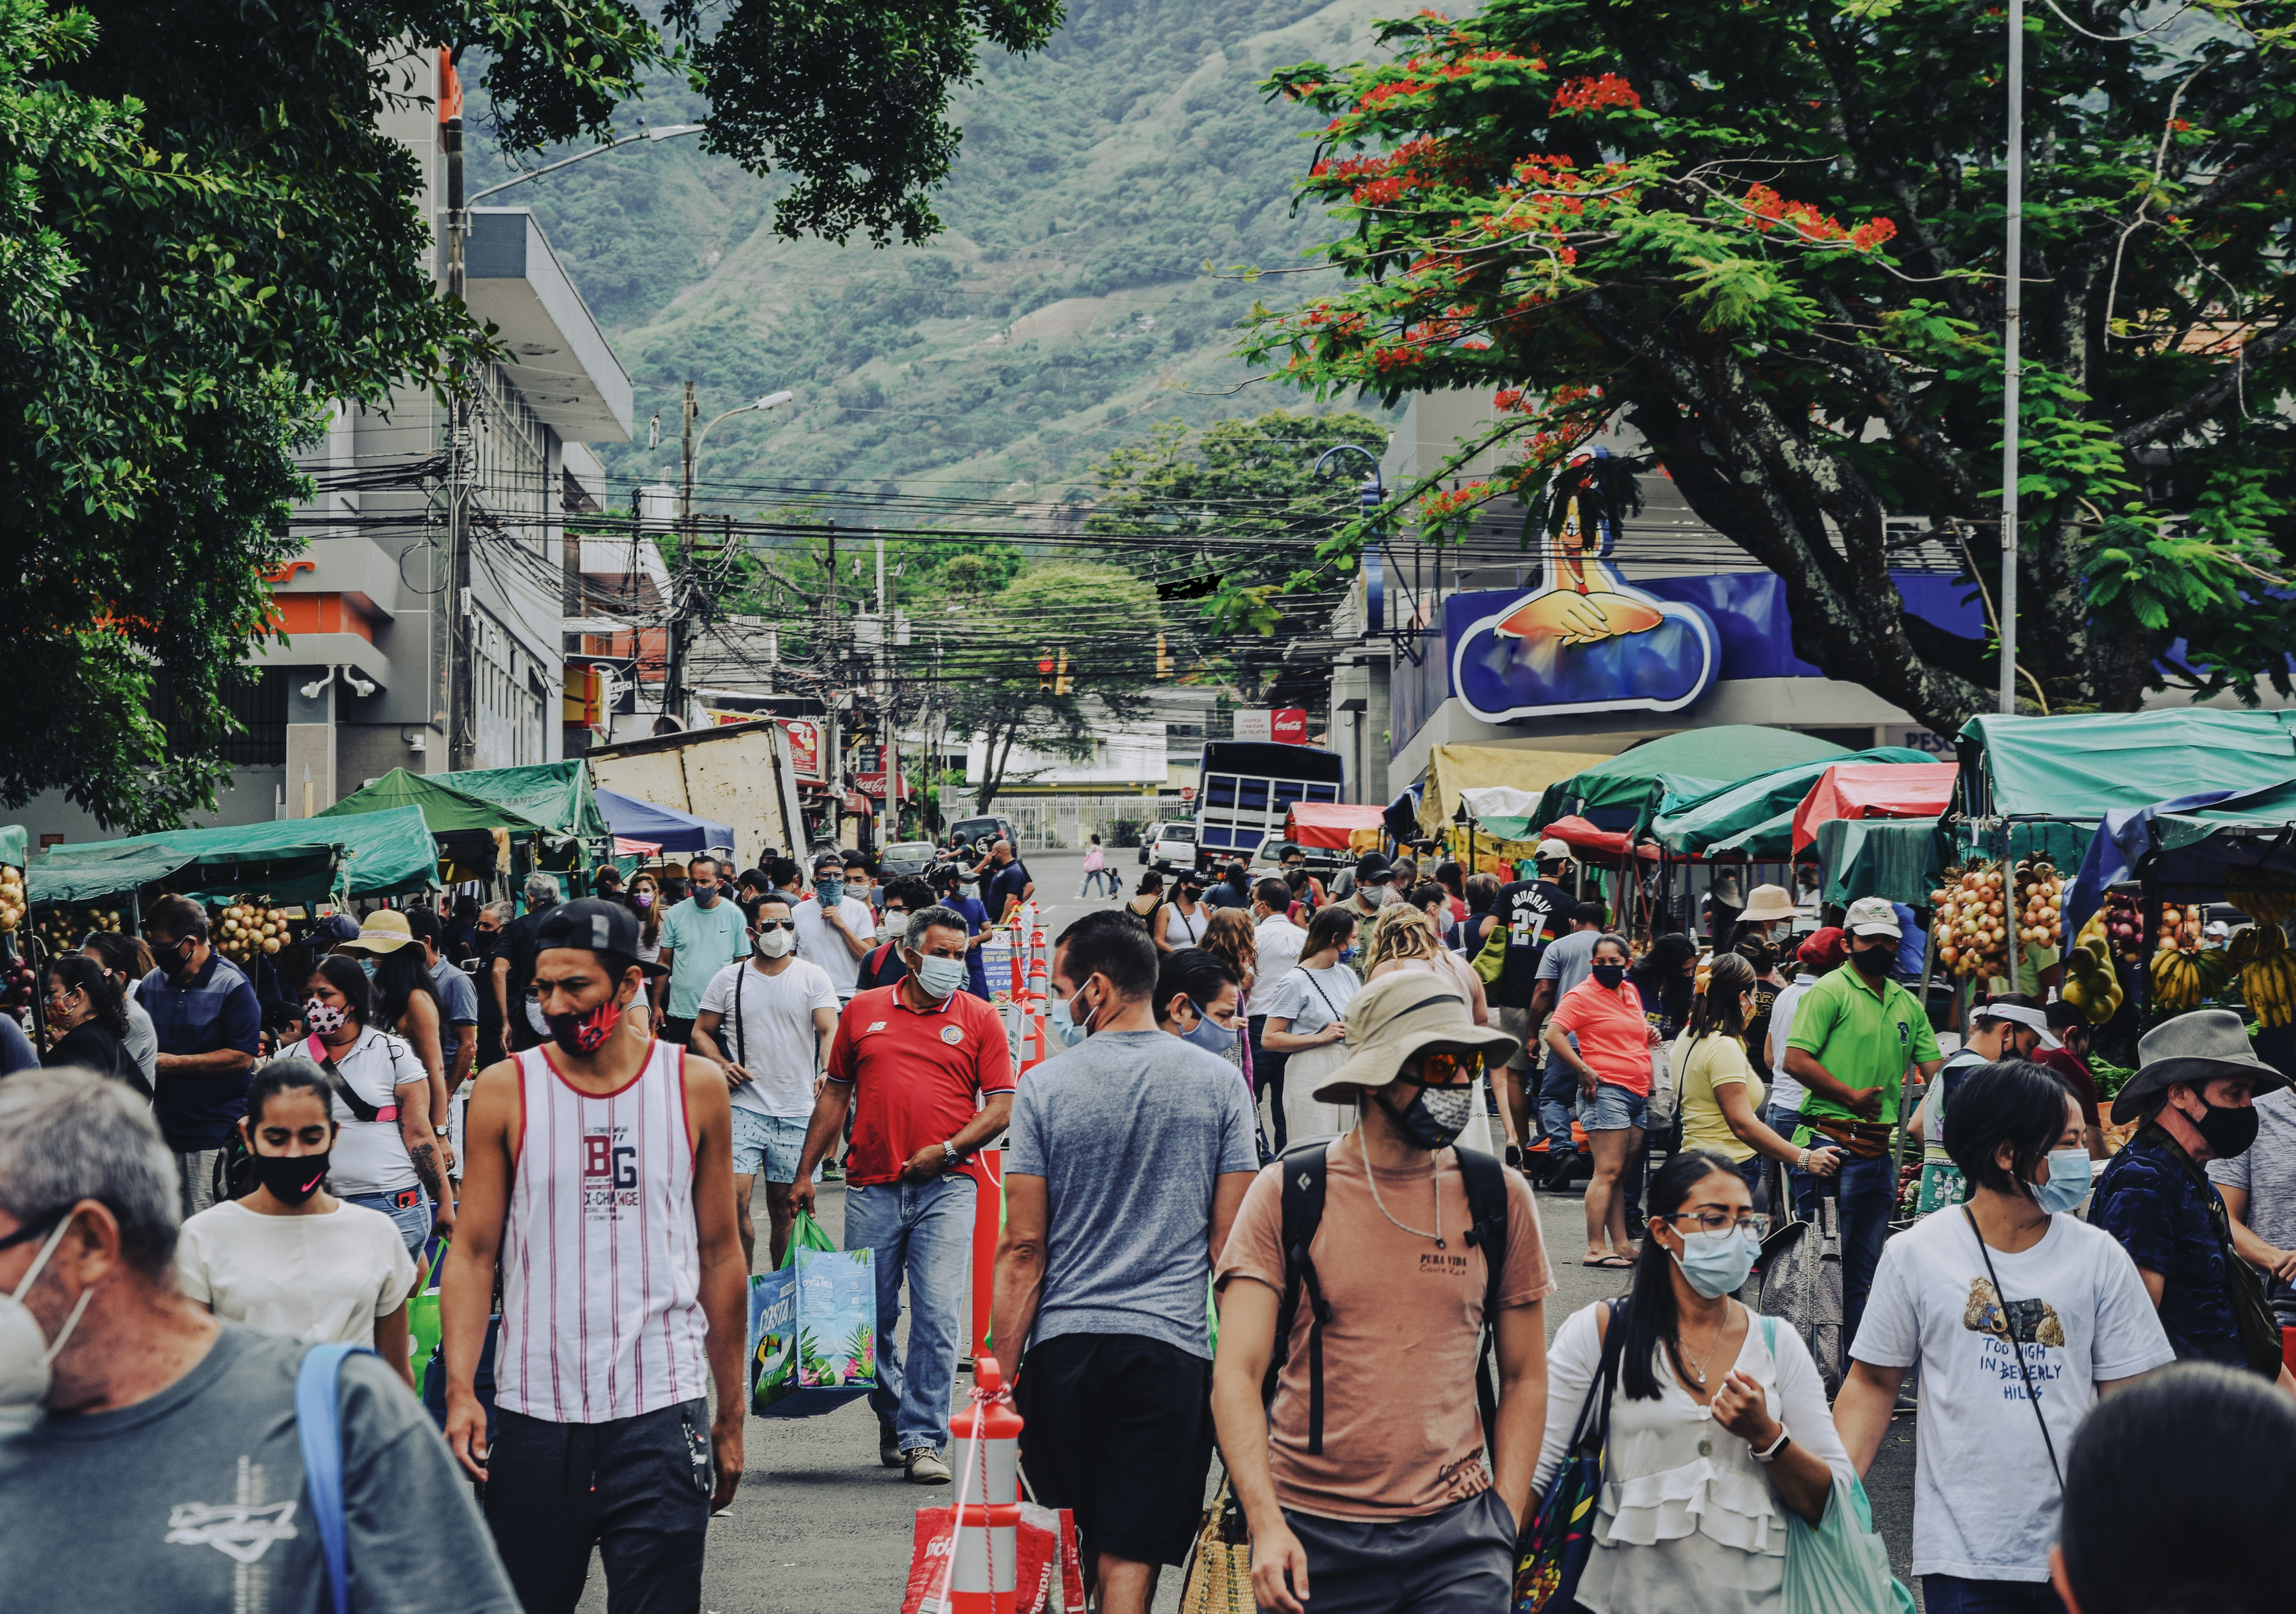 Carïcaco, Newtopia Vc And Carao Ventures Join Forces To Promote Startups In Central America